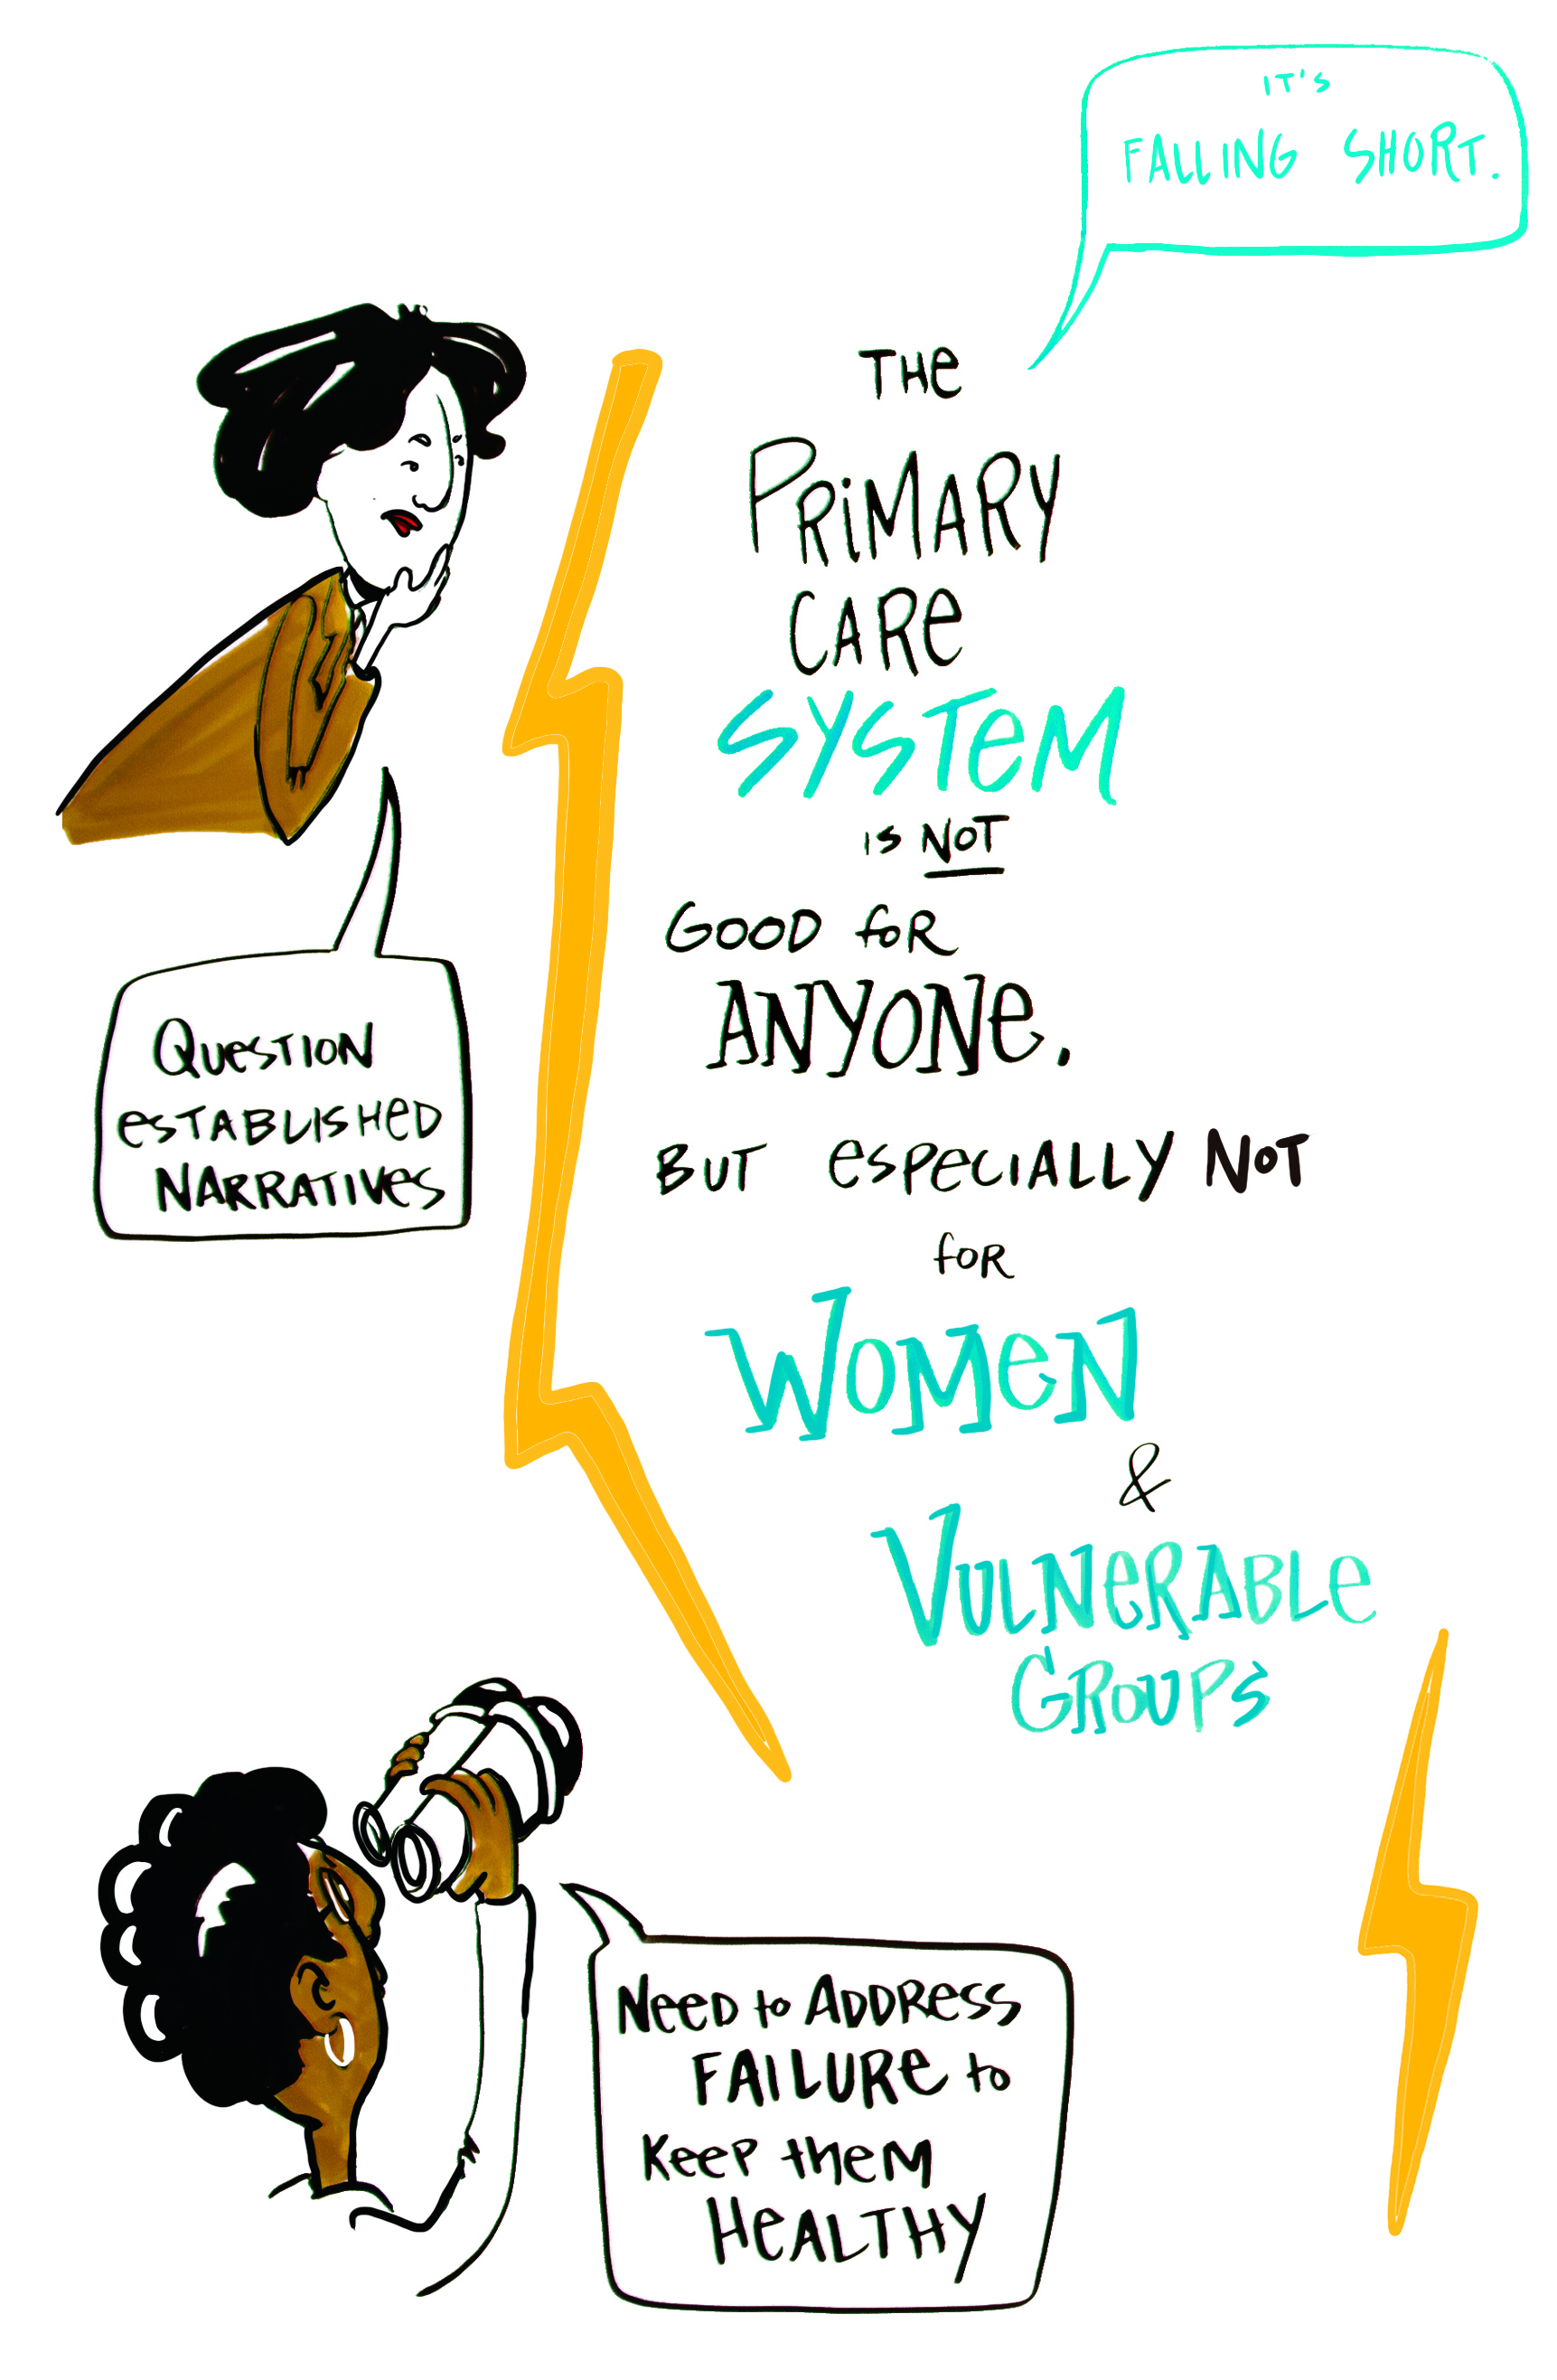 A “graphic recording” of national experts’ views on the current primary health care system, which was uniformly perceived to be inadequately meeting women’s needs.